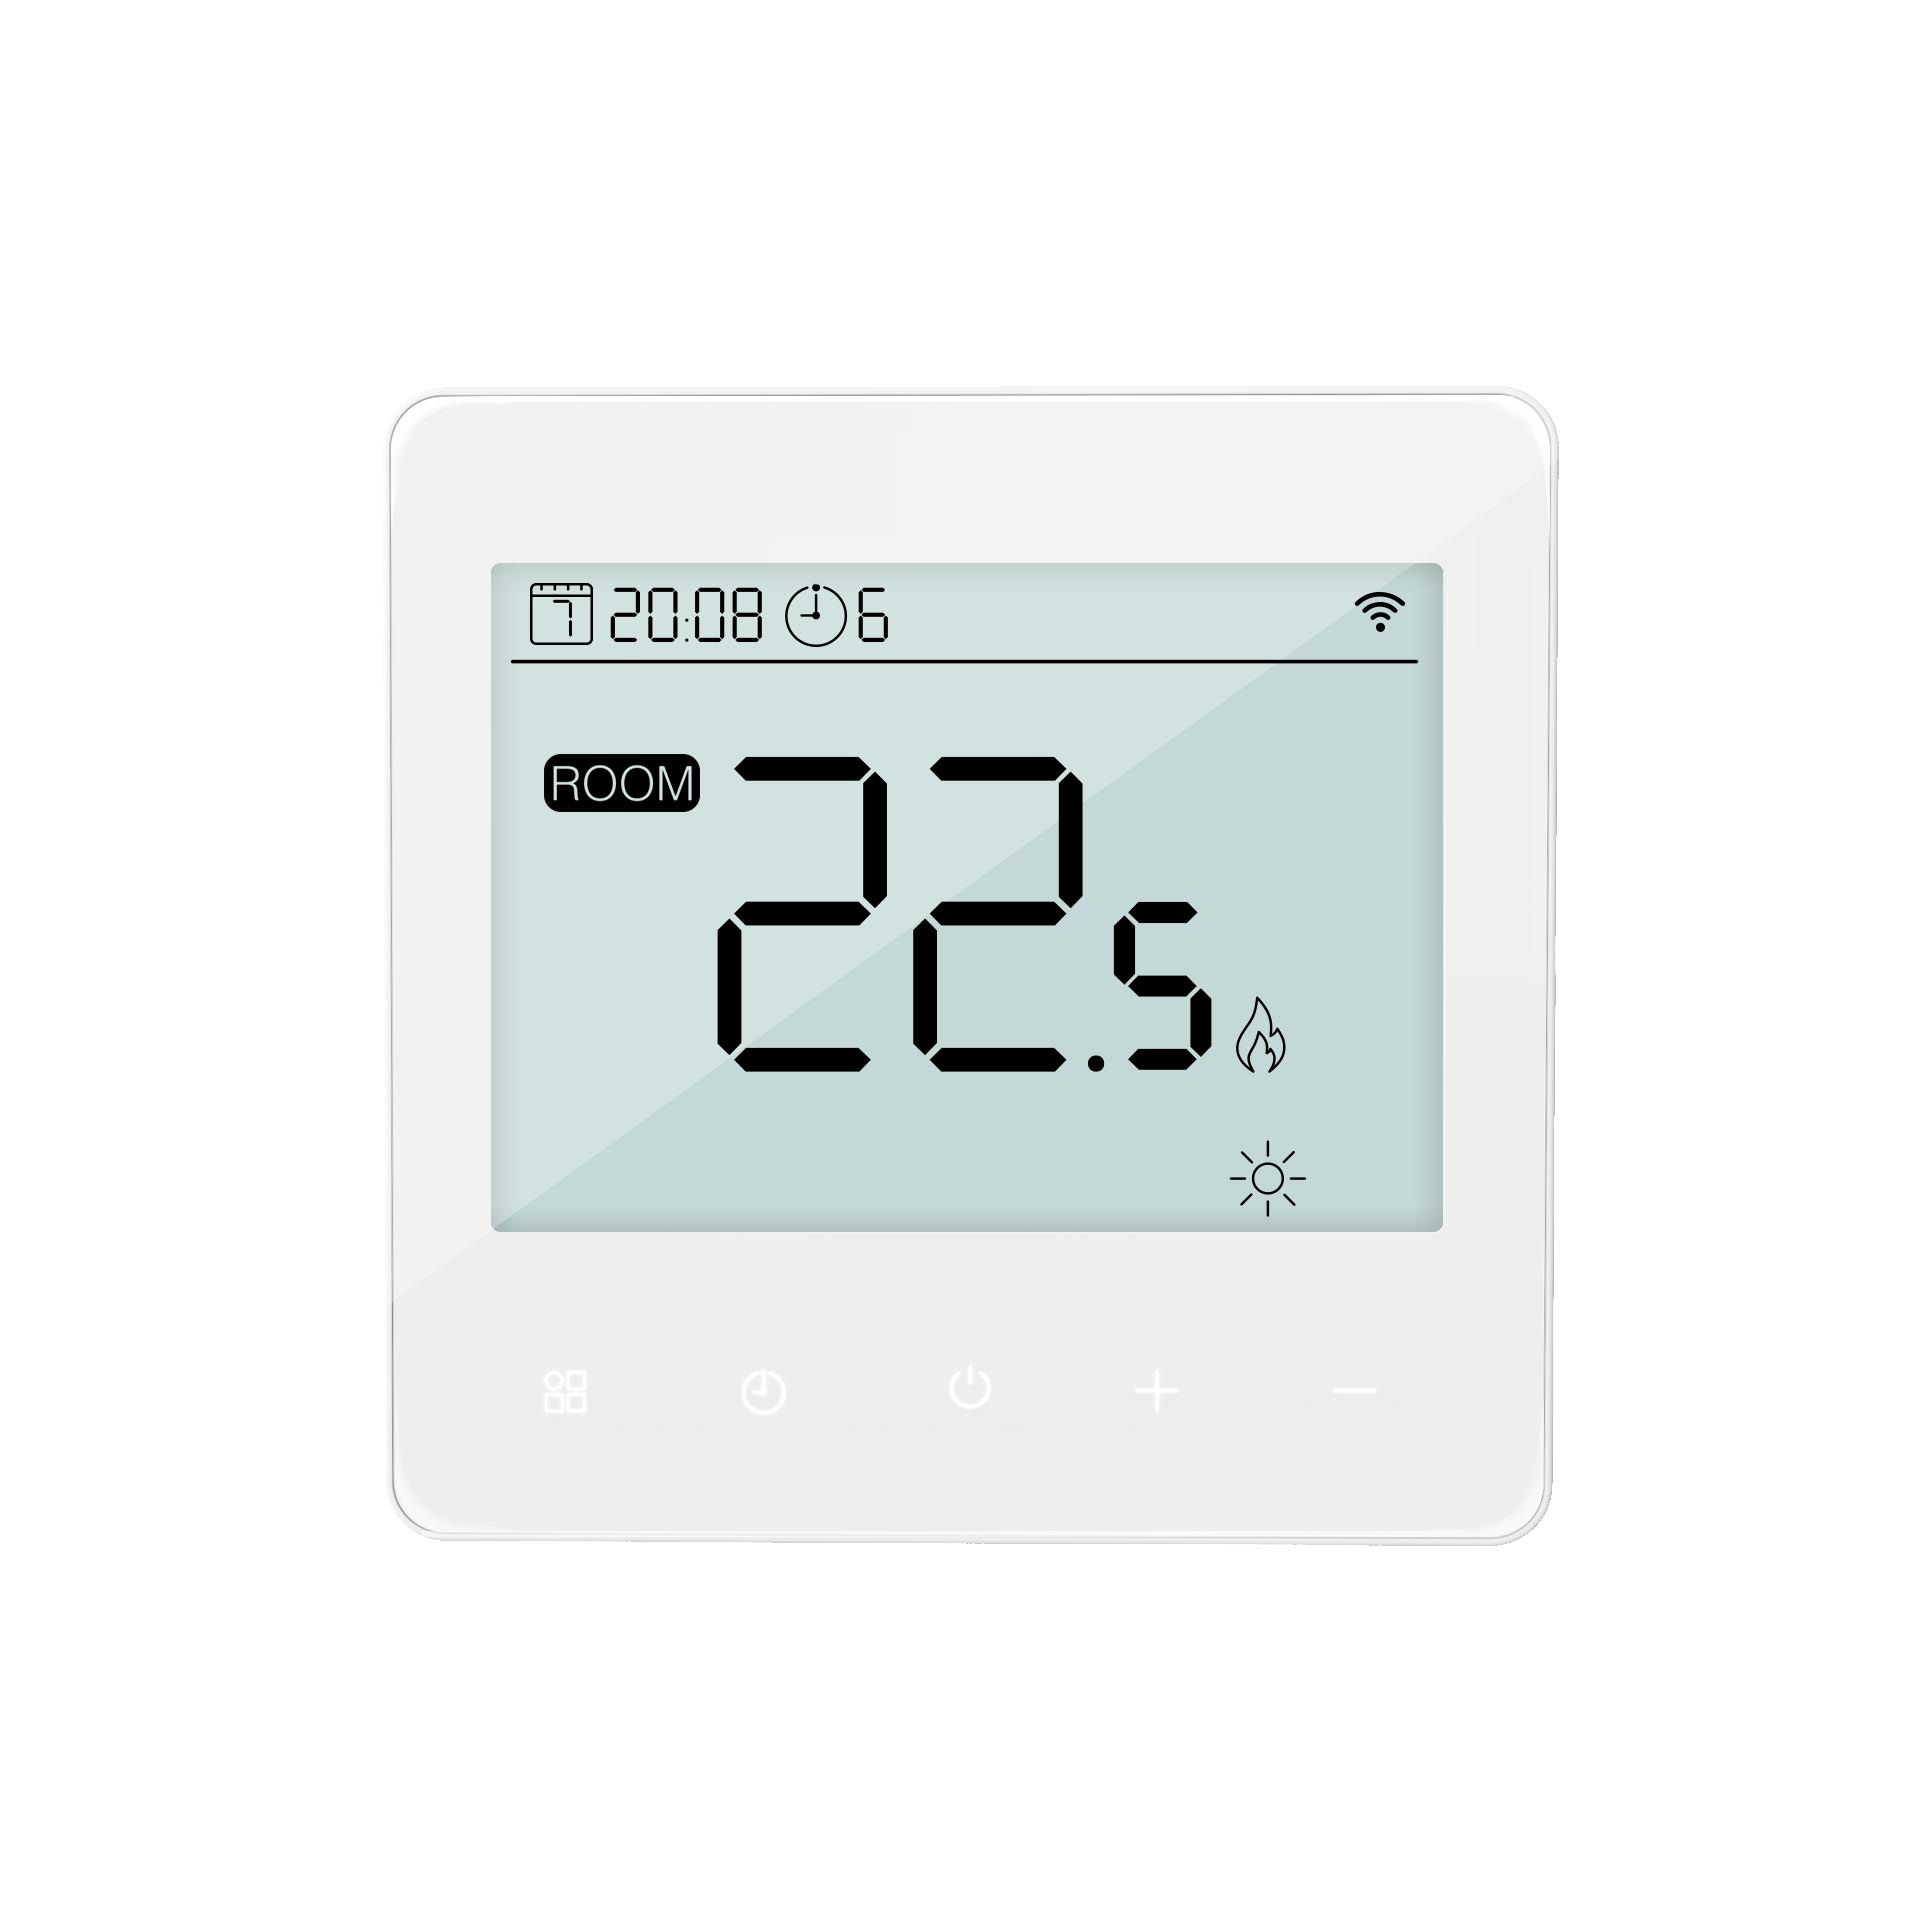 E-Top New WiFi Smart Thermostat for Underfloor & Ceiling Heating Cooling system control